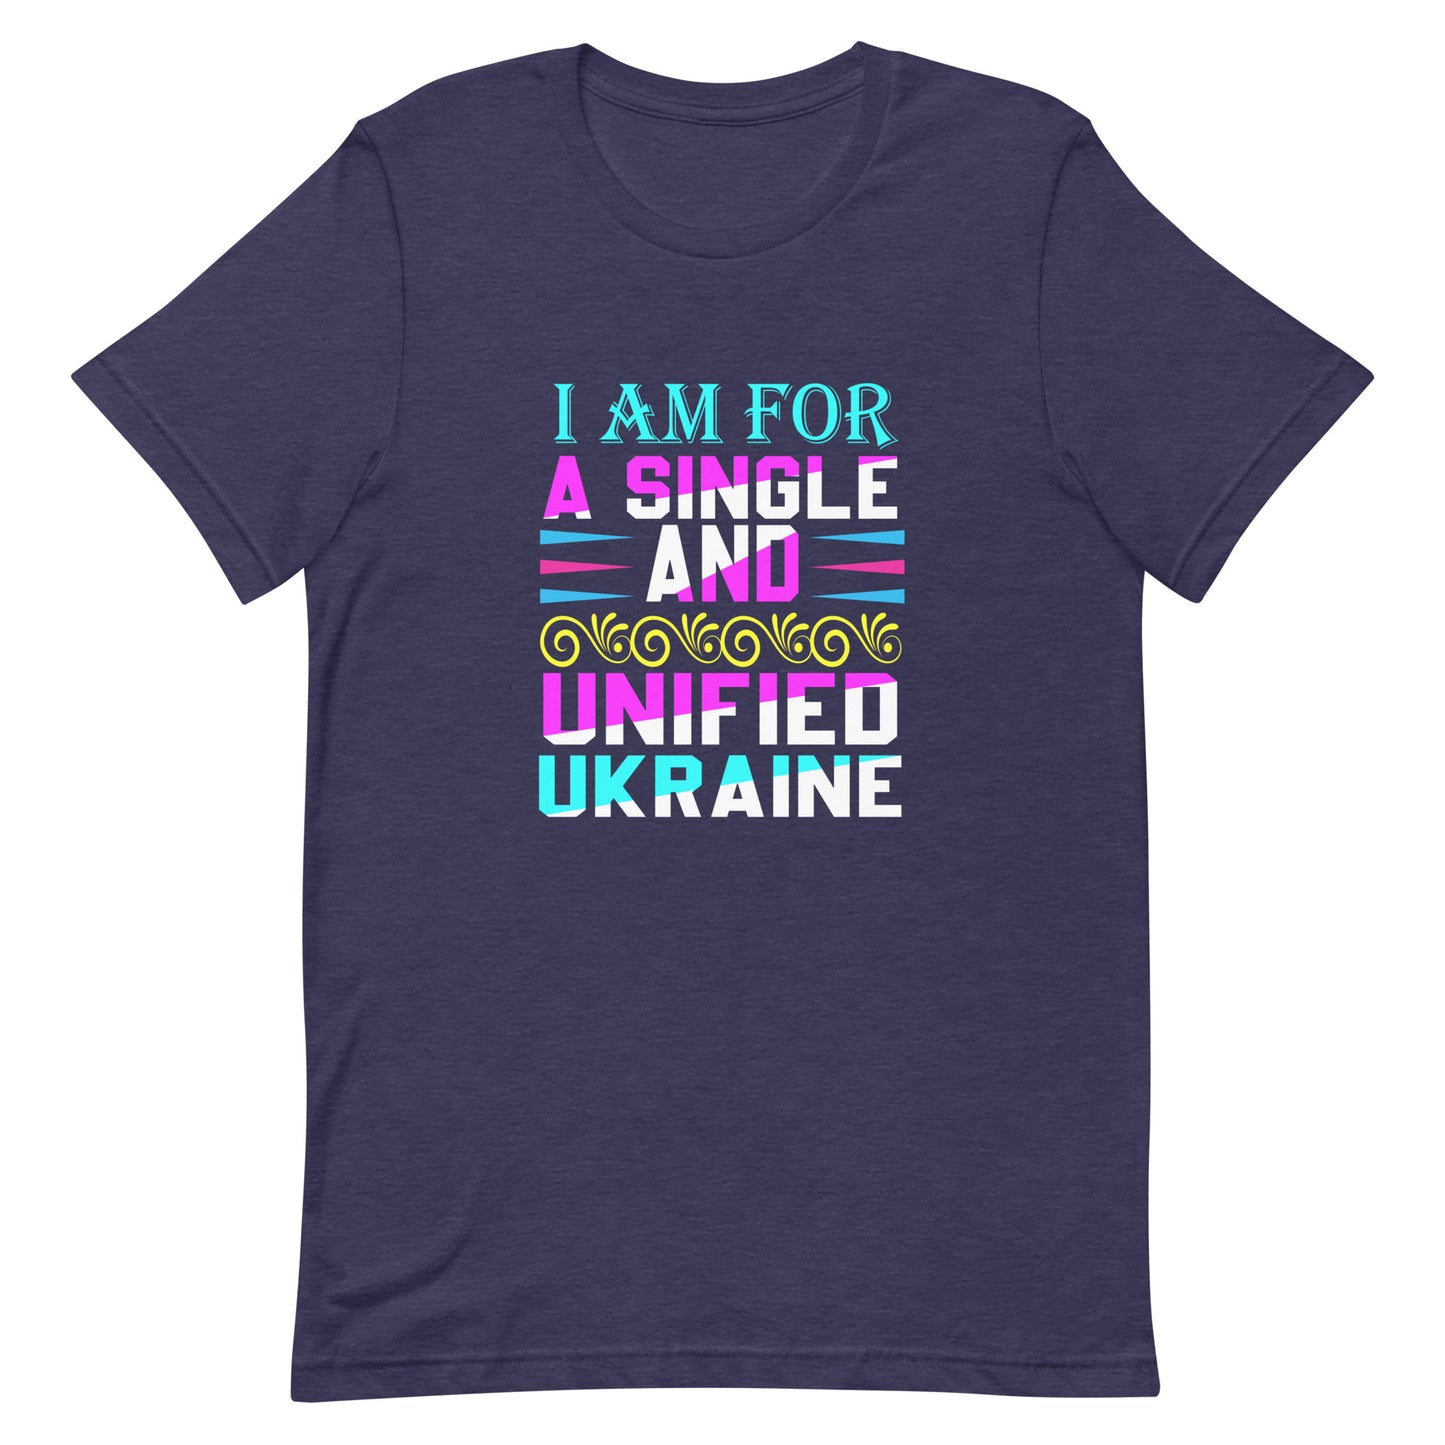 I am for a single and unified Ukraine | Unisex t-shirt